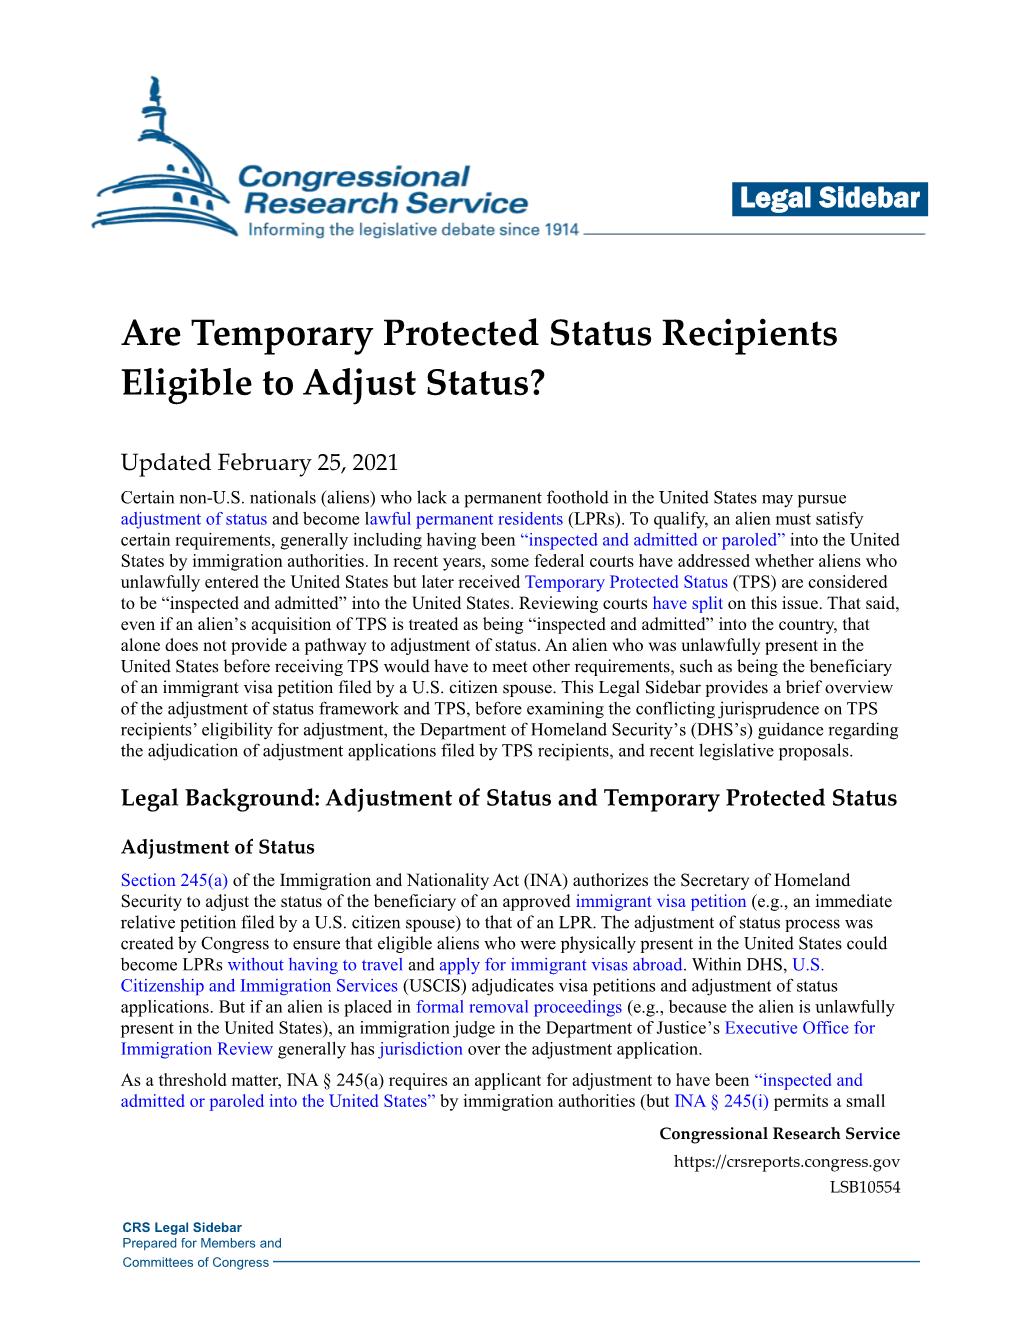 Are Temporary Protected Status Recipients Eligible to Adjust Status?